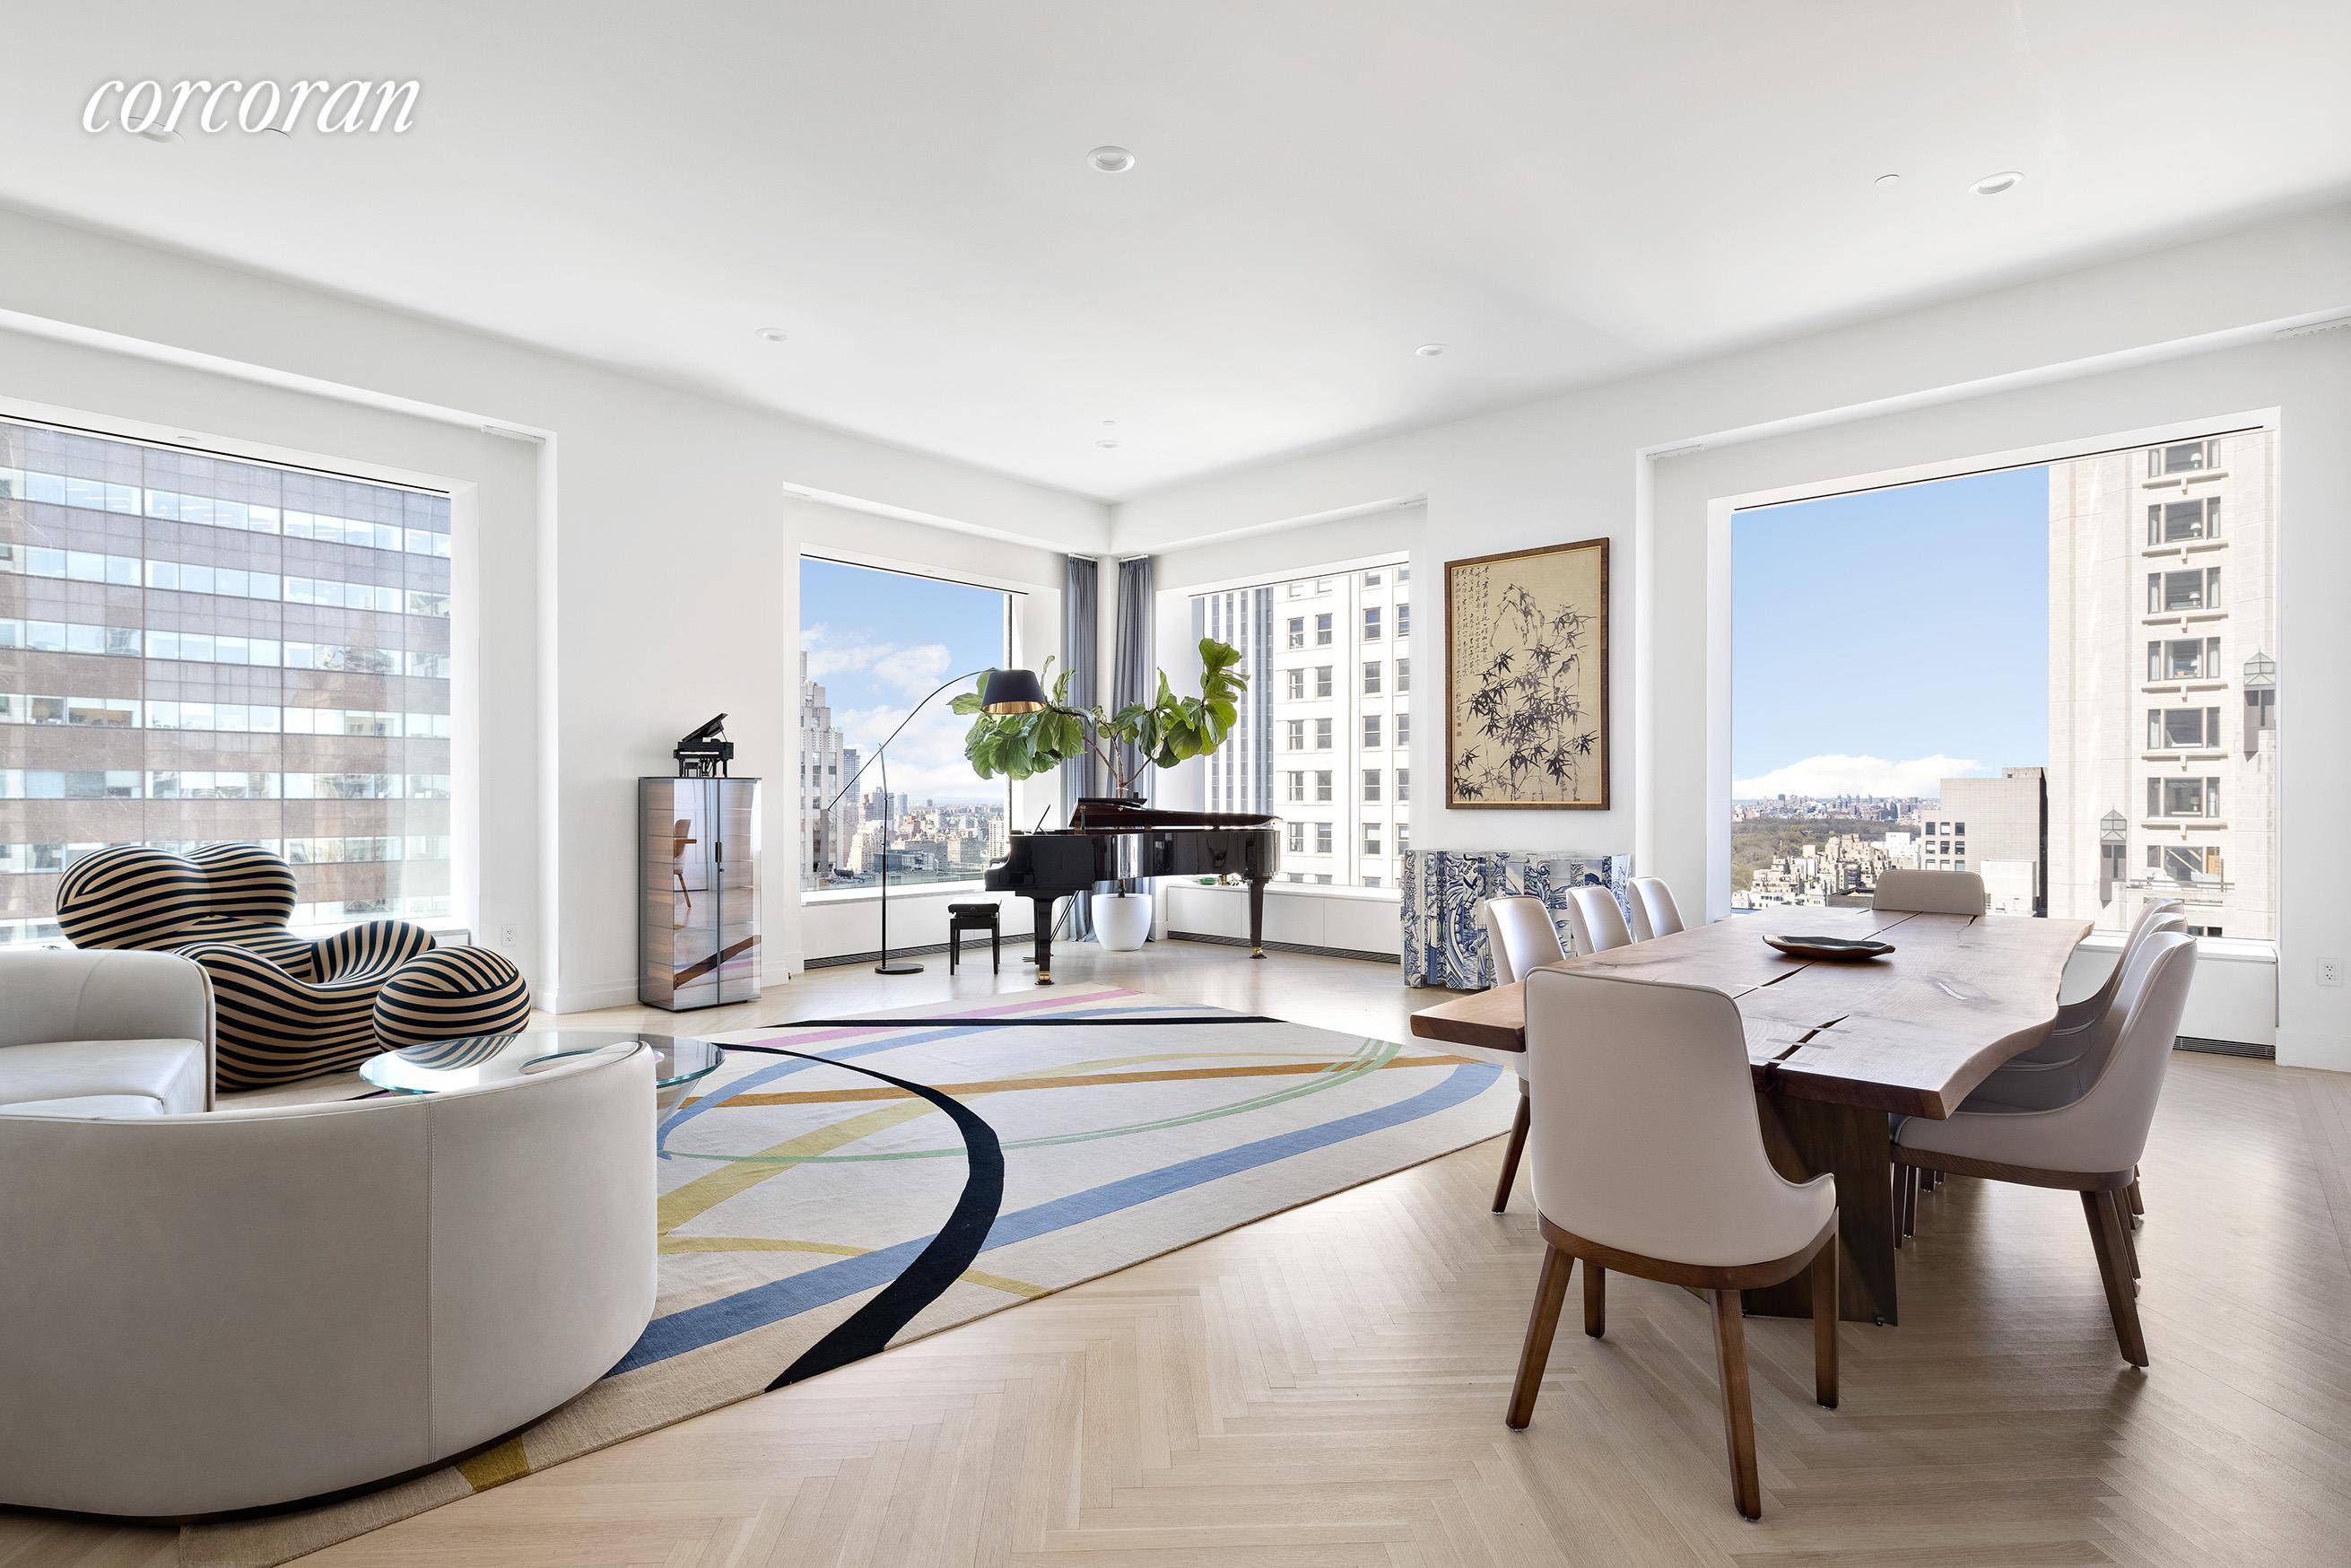 Residence 35B at 432 Park Avenue Three Bedrooms Four Baths Library Powder Room 4, 003 sqft Residence 35B at 432 Park Avenue is a half floor residence featuring a perfect ...